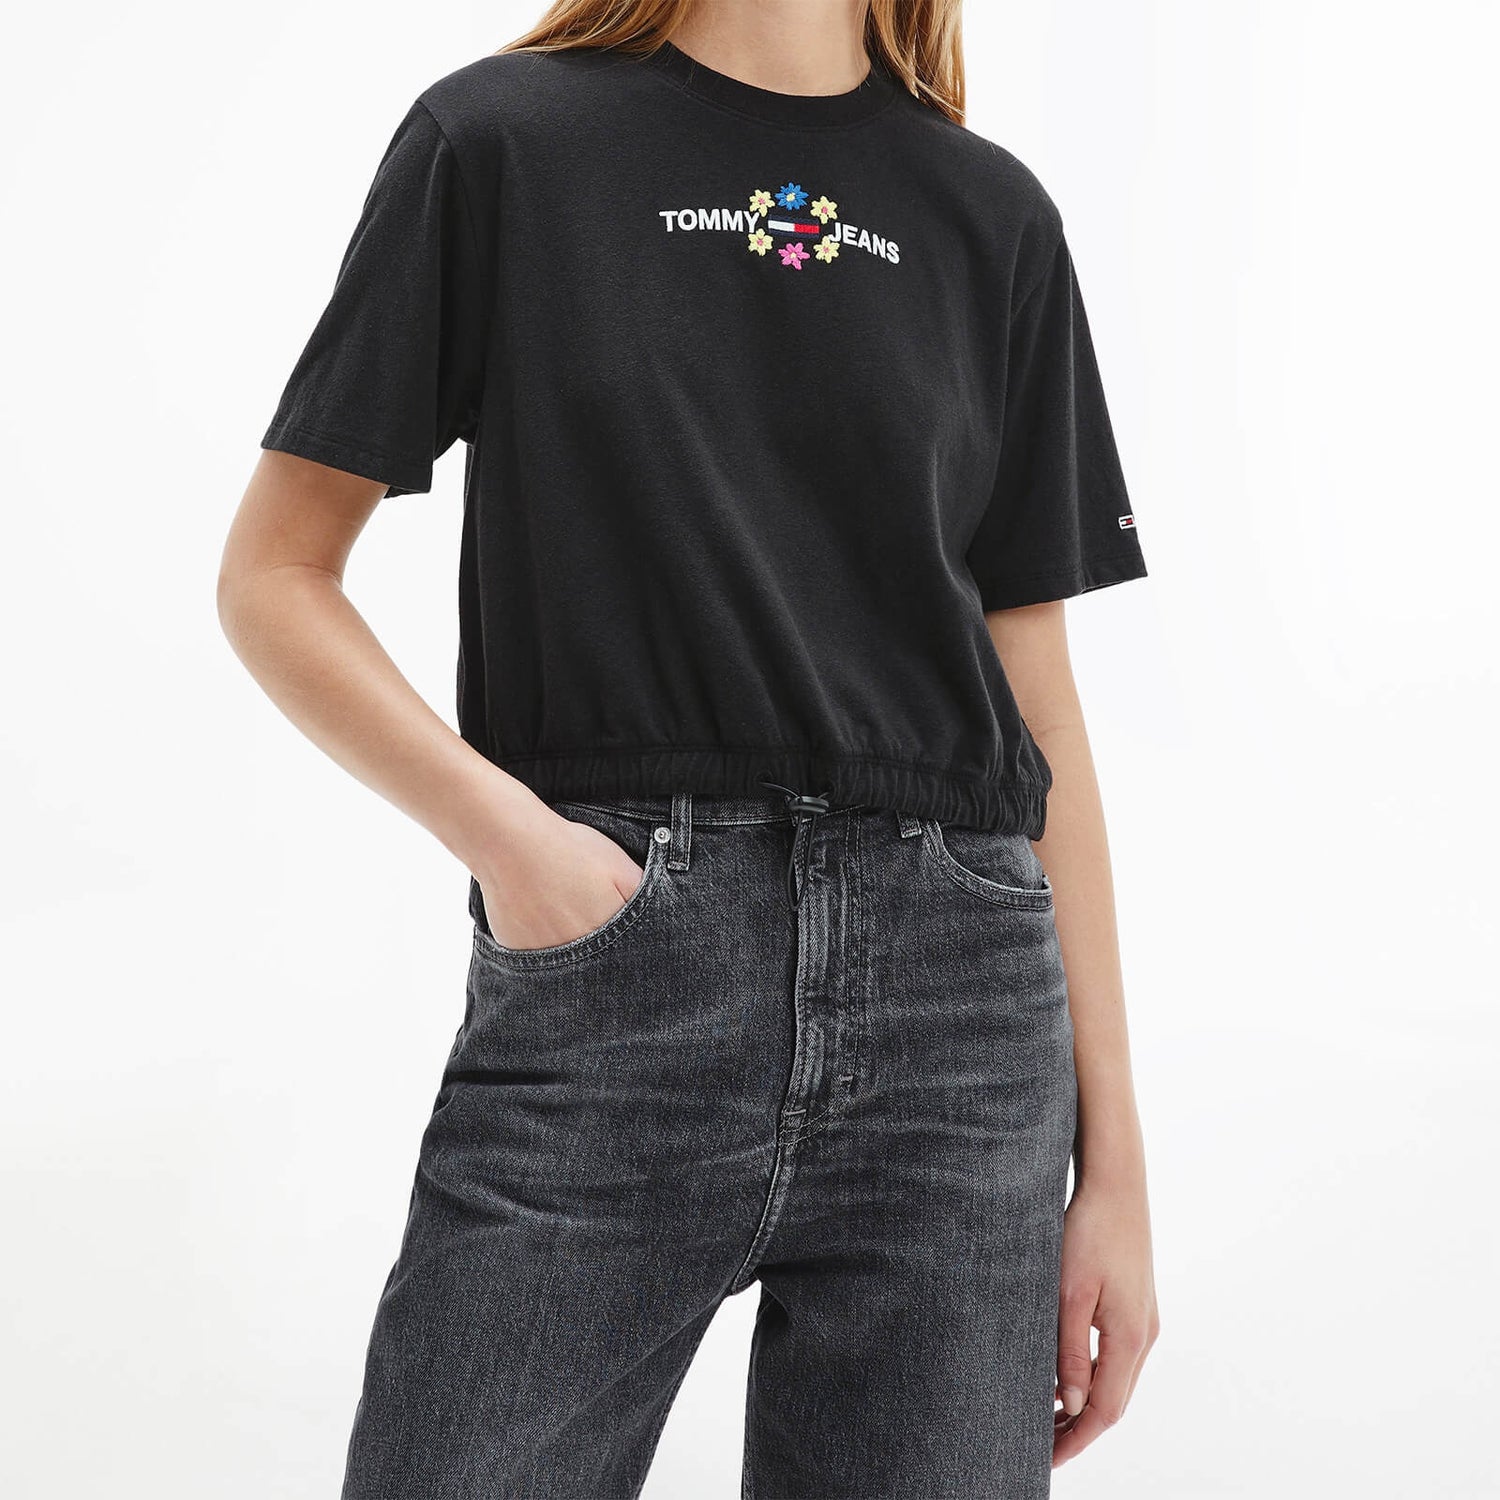 Tommy Jeans Women's Sustainable Crop Floral T-Shirt - Black - M